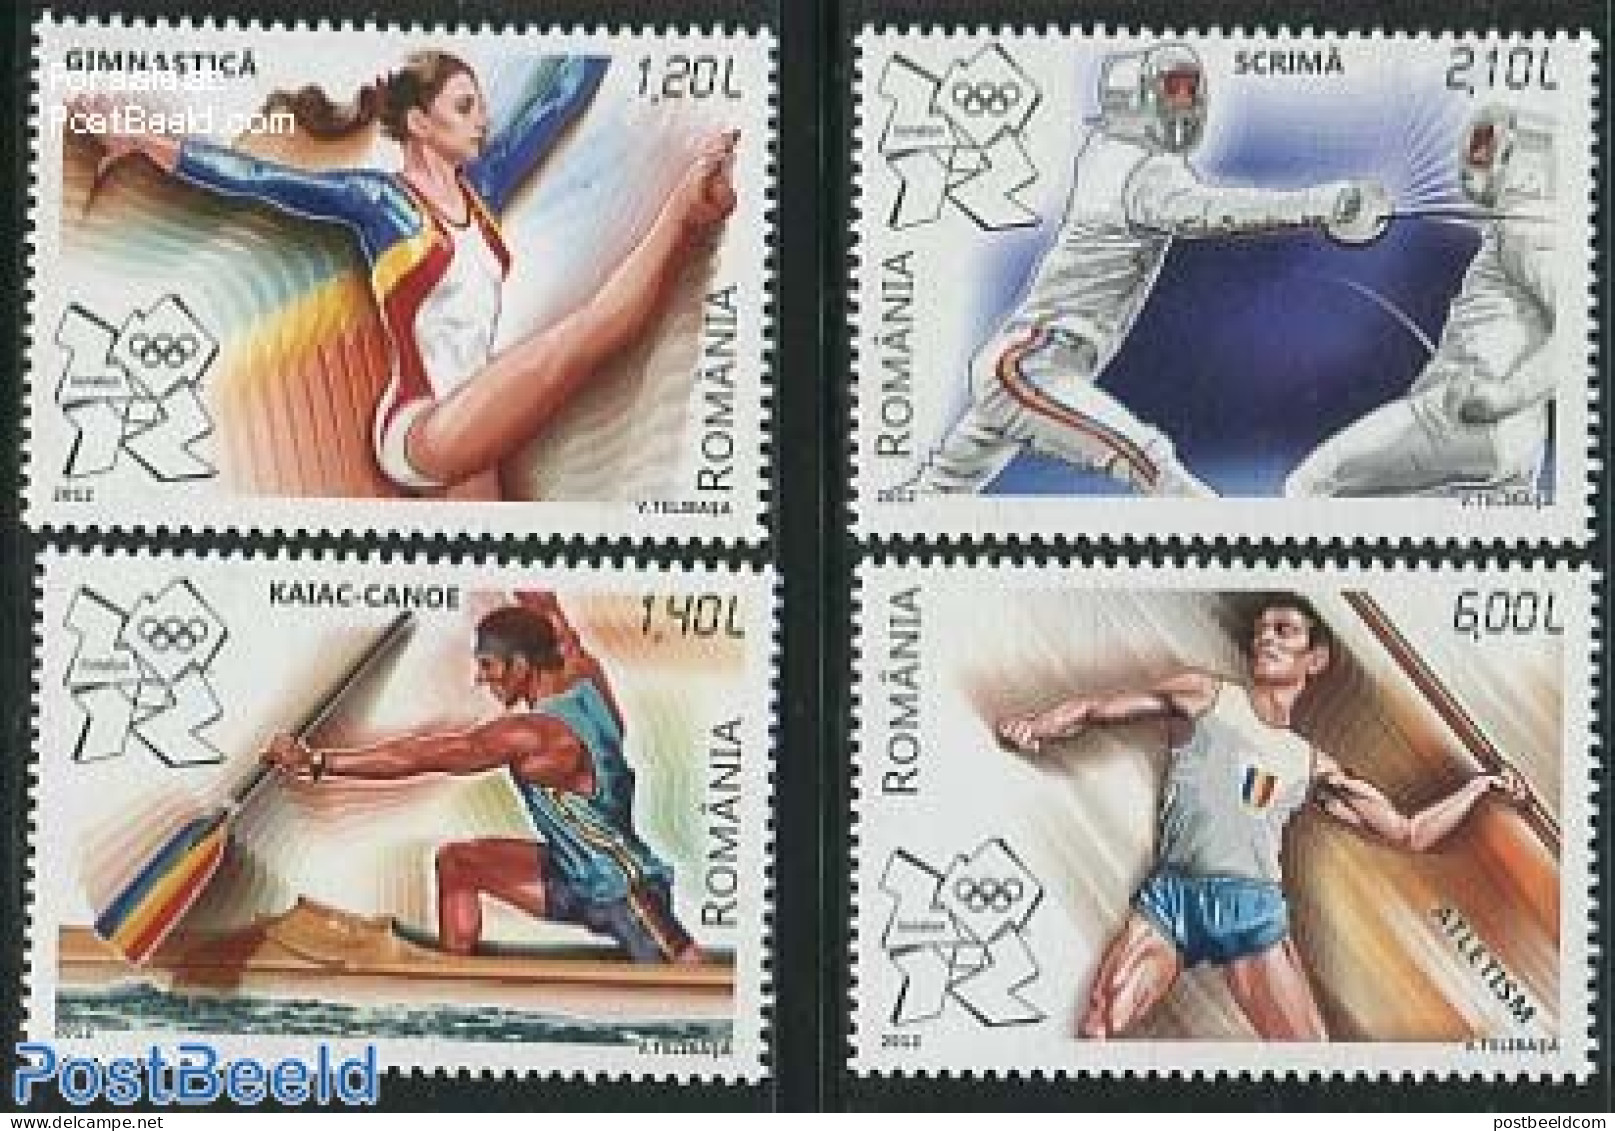 Romania 2012 Olympic Games London 4v, Mint NH, Sport - Athletics - Fencing - Kayaks & Rowing - Olympic Games - Unused Stamps